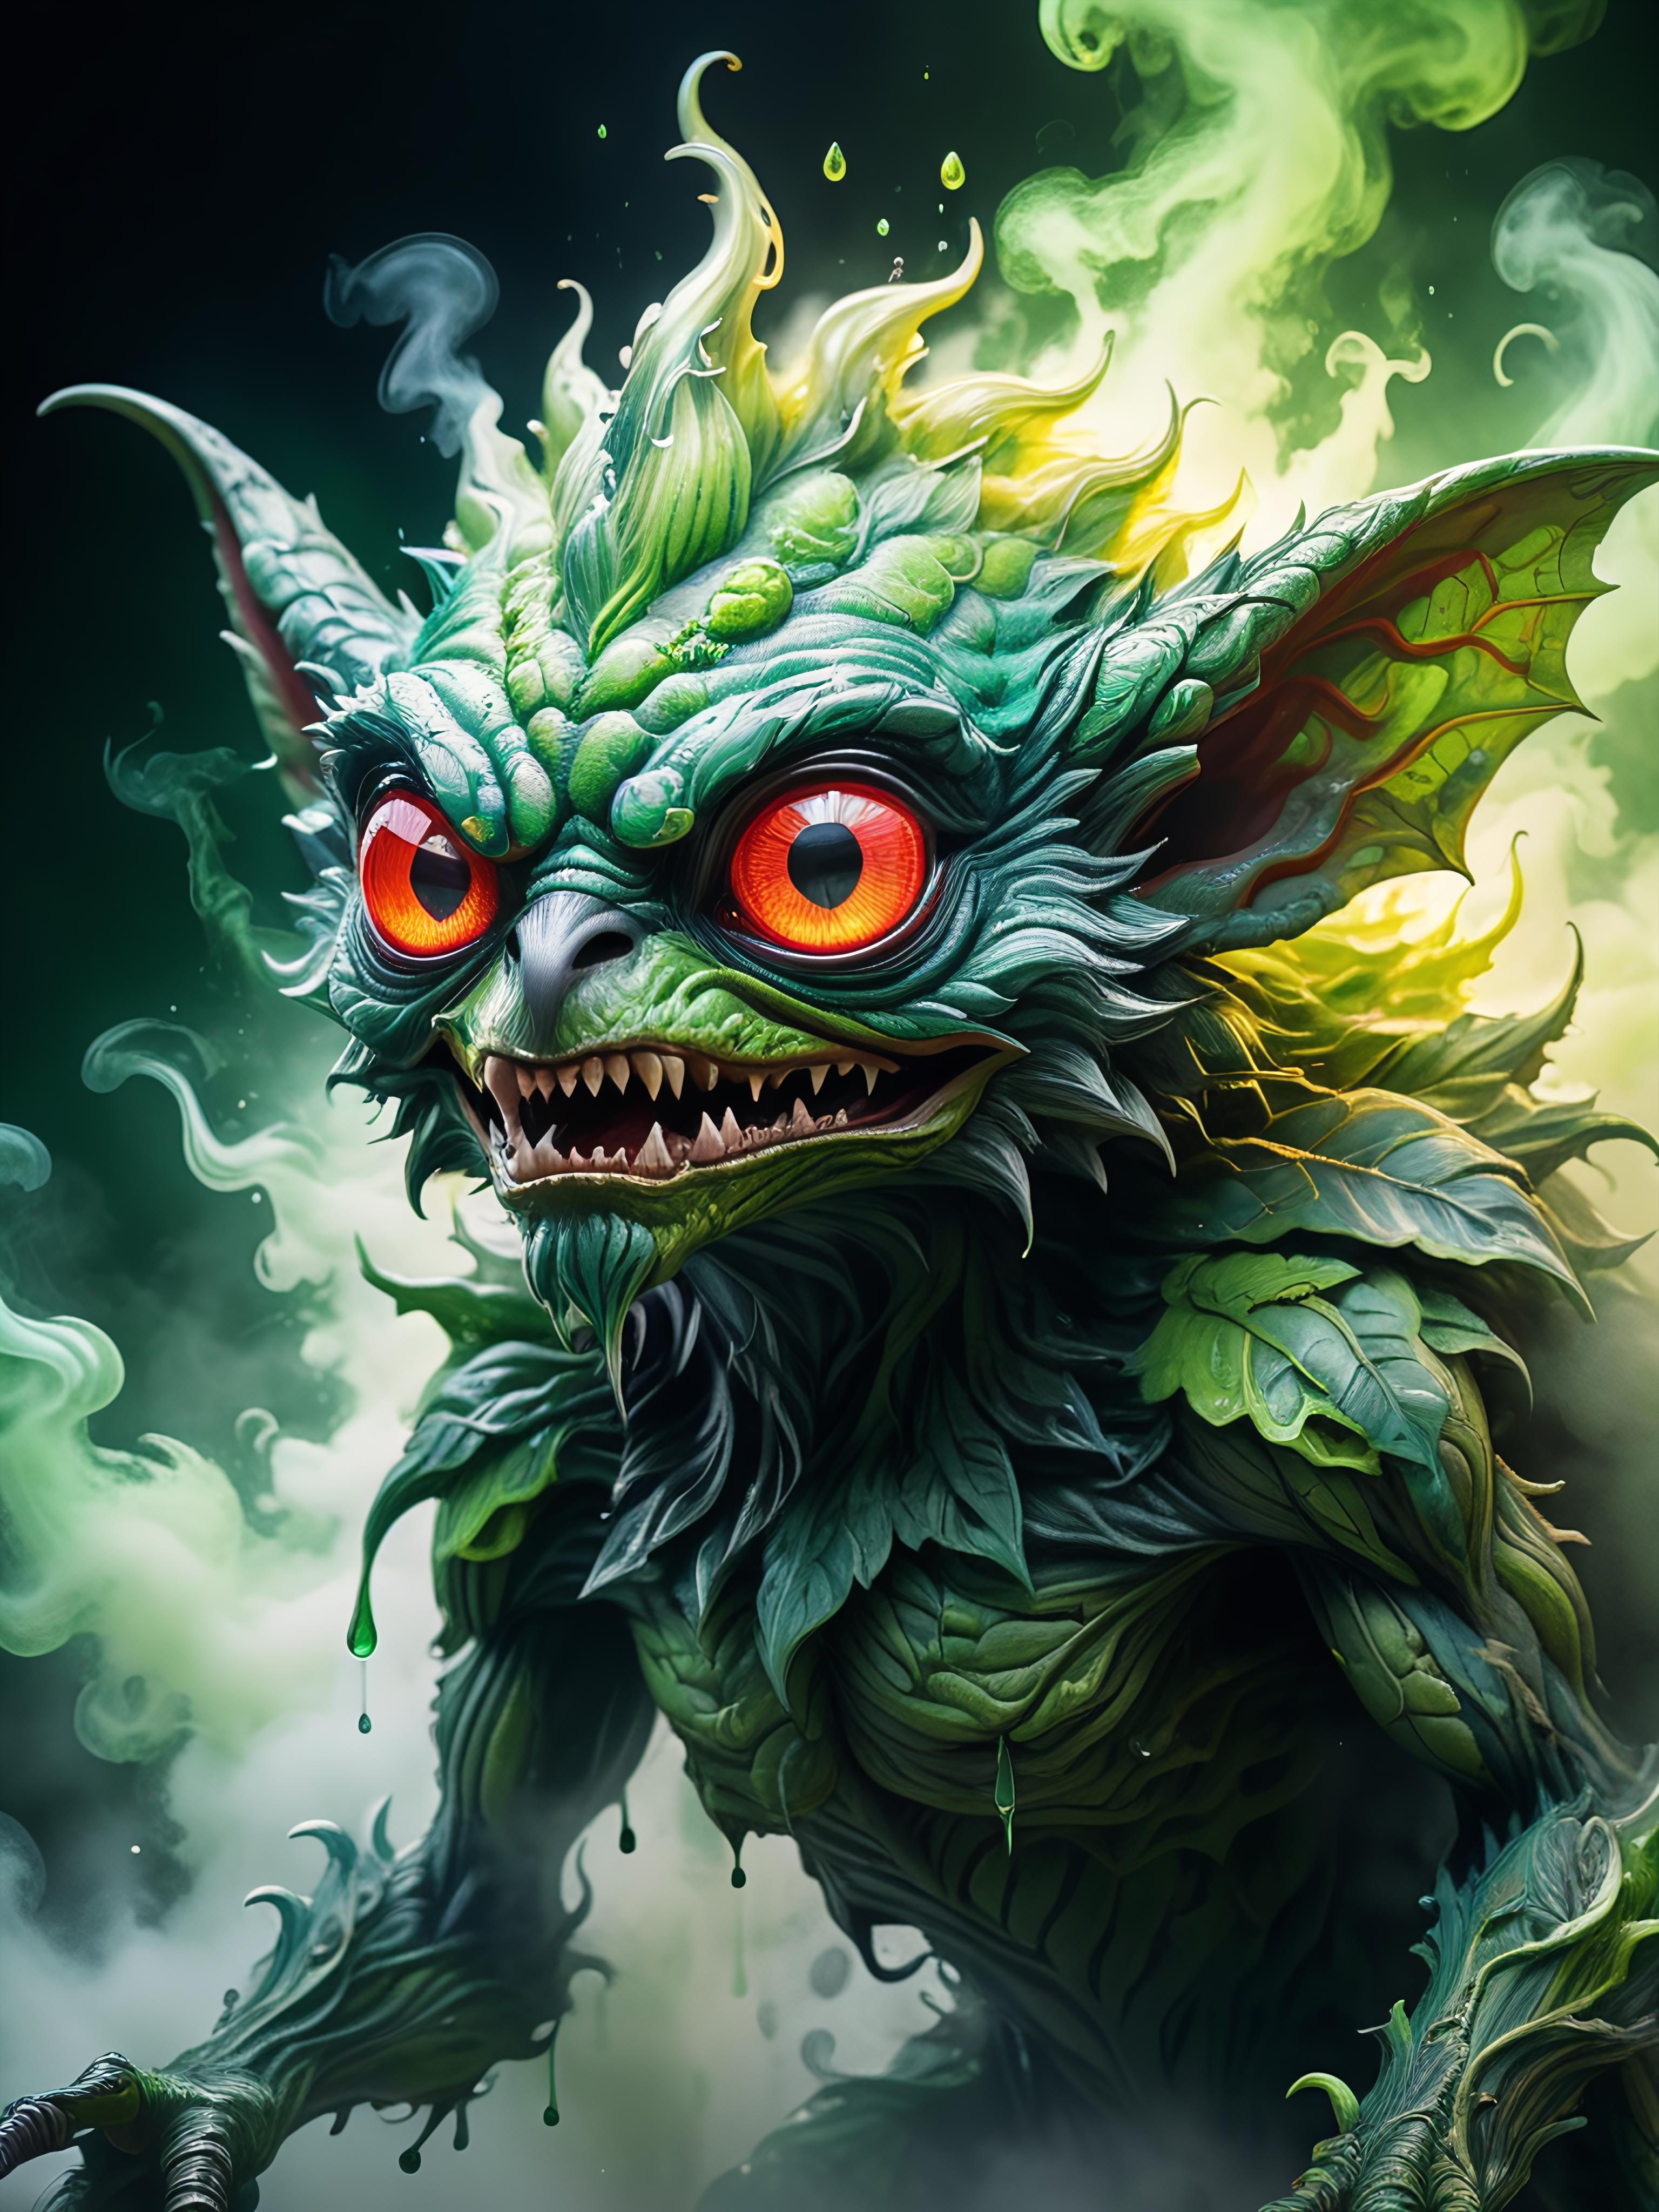 Angry green creature with red eyes, possibly a demon or an alien, stands in a dark background.